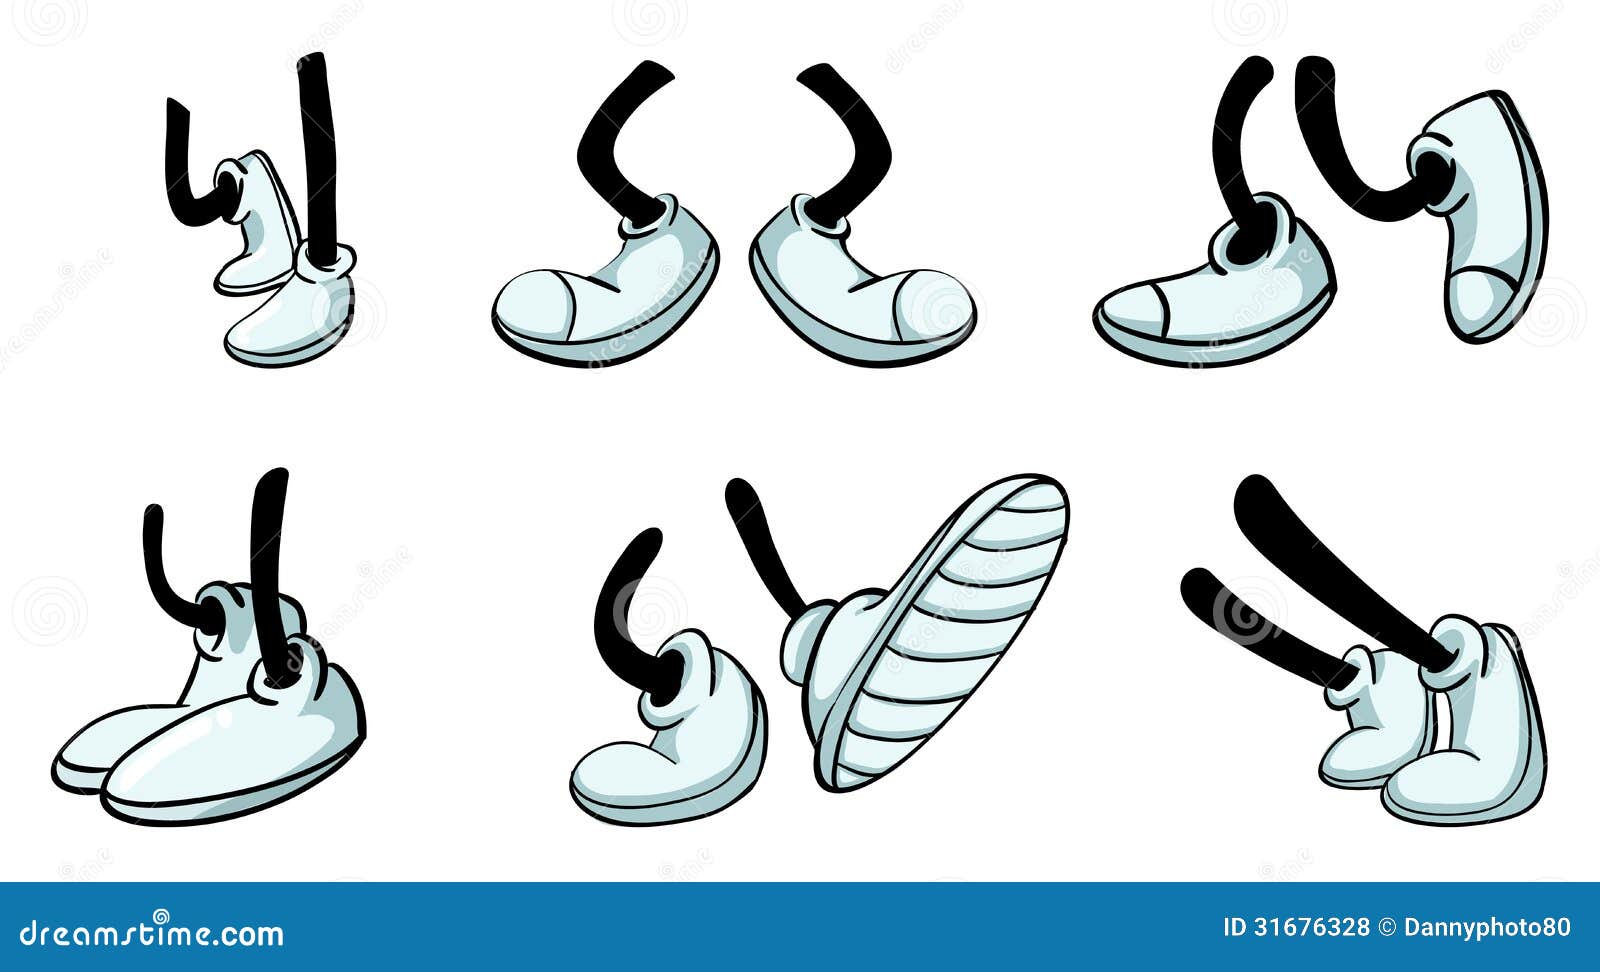 clipart arms and legs - photo #16